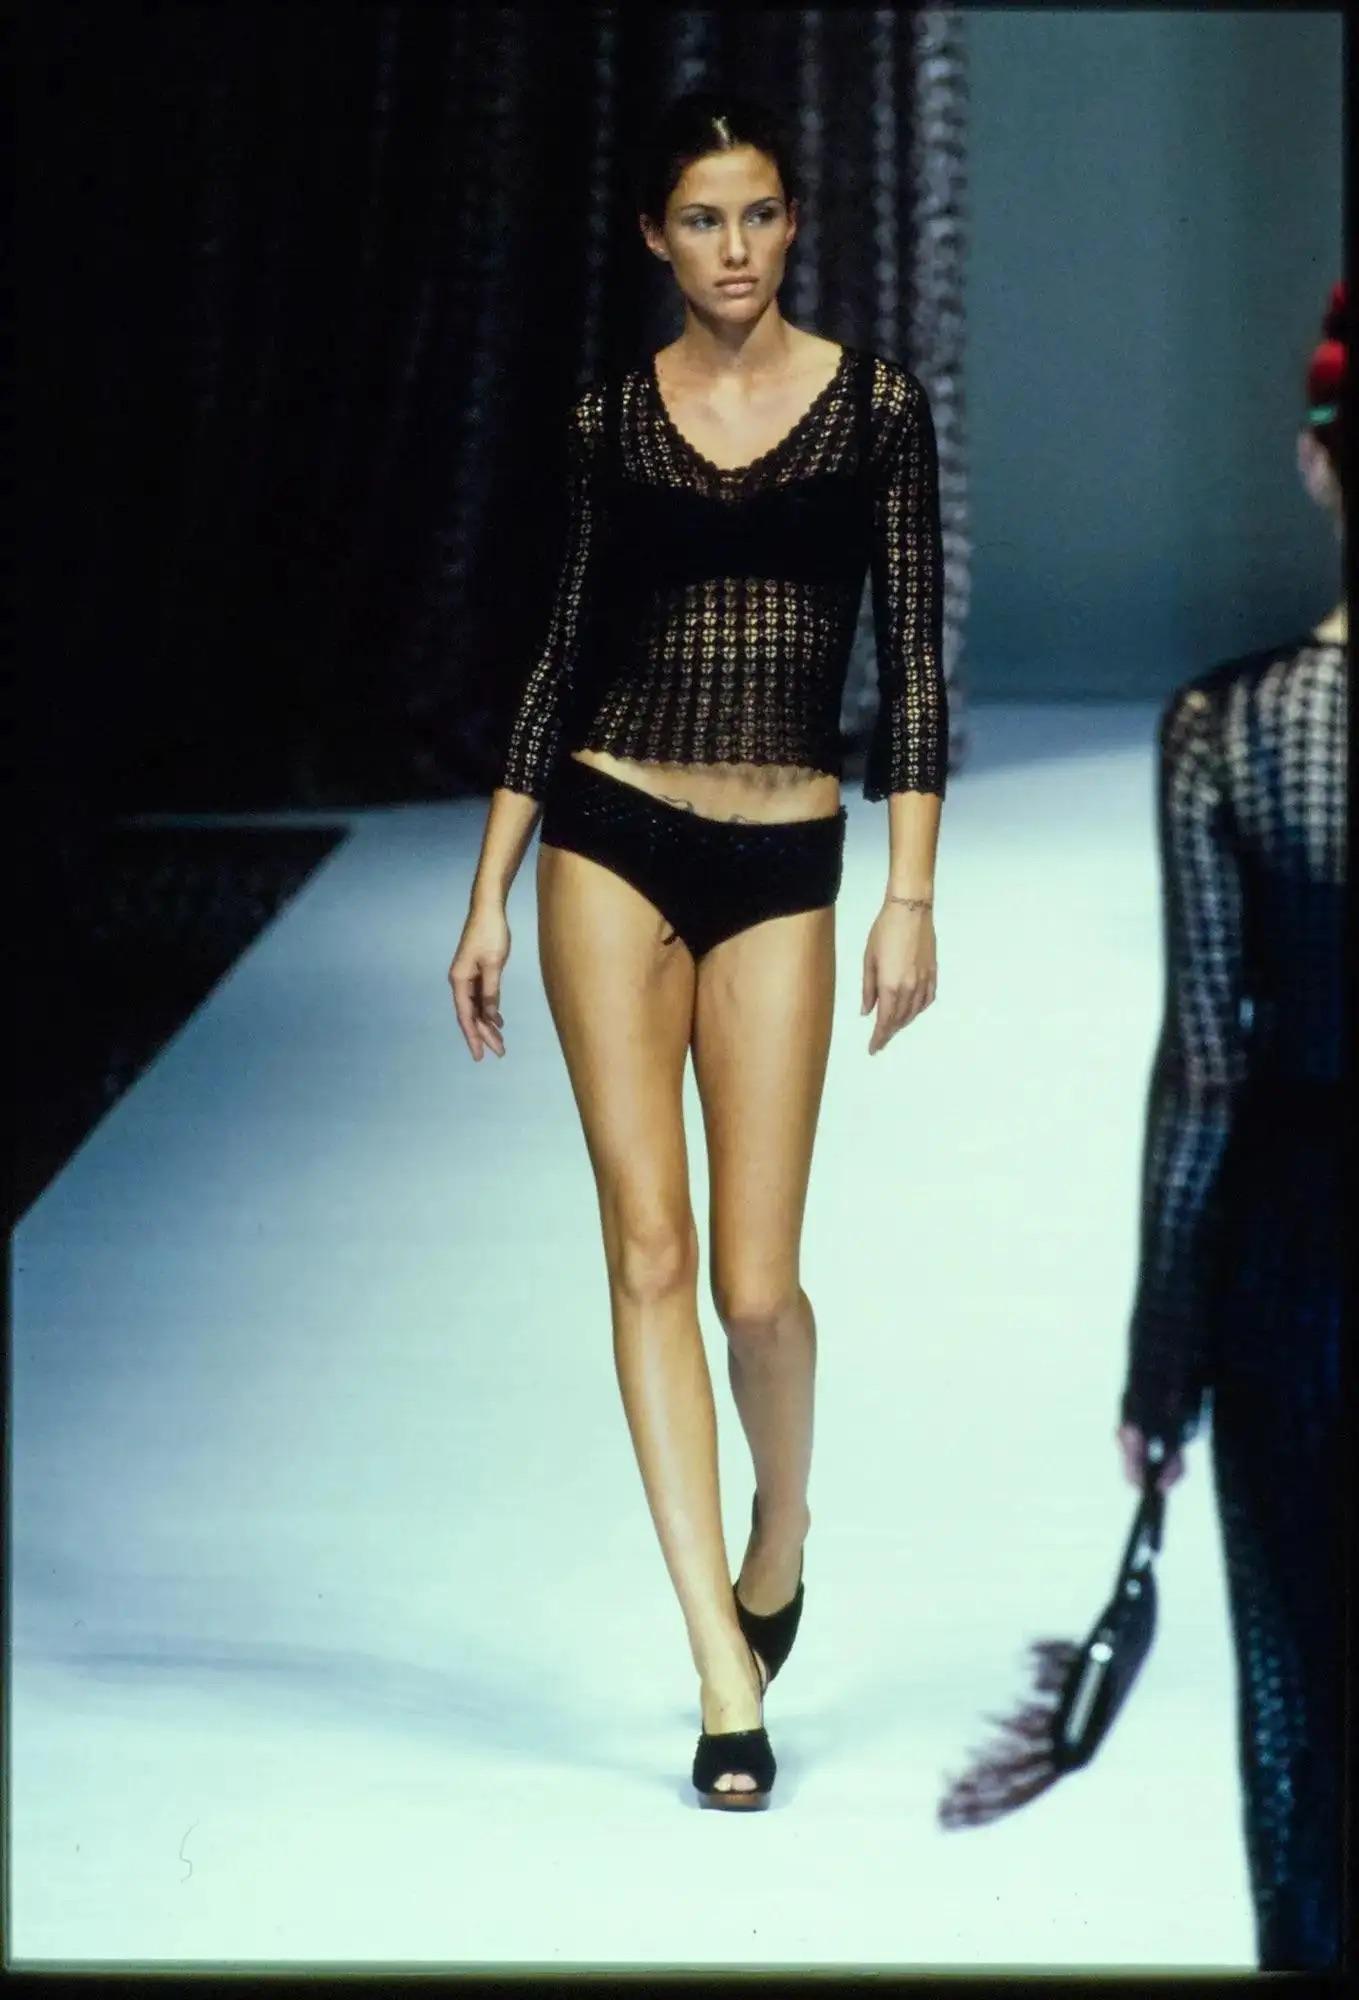 Presenting a gorgeous black crochet Dolce & Gabbana top. From the Spring/Summer 1997 collection, several similar pieces debuted on the season's runway. The top features a scoop neckline, a floral crochet pattern, and is made complete with cropped